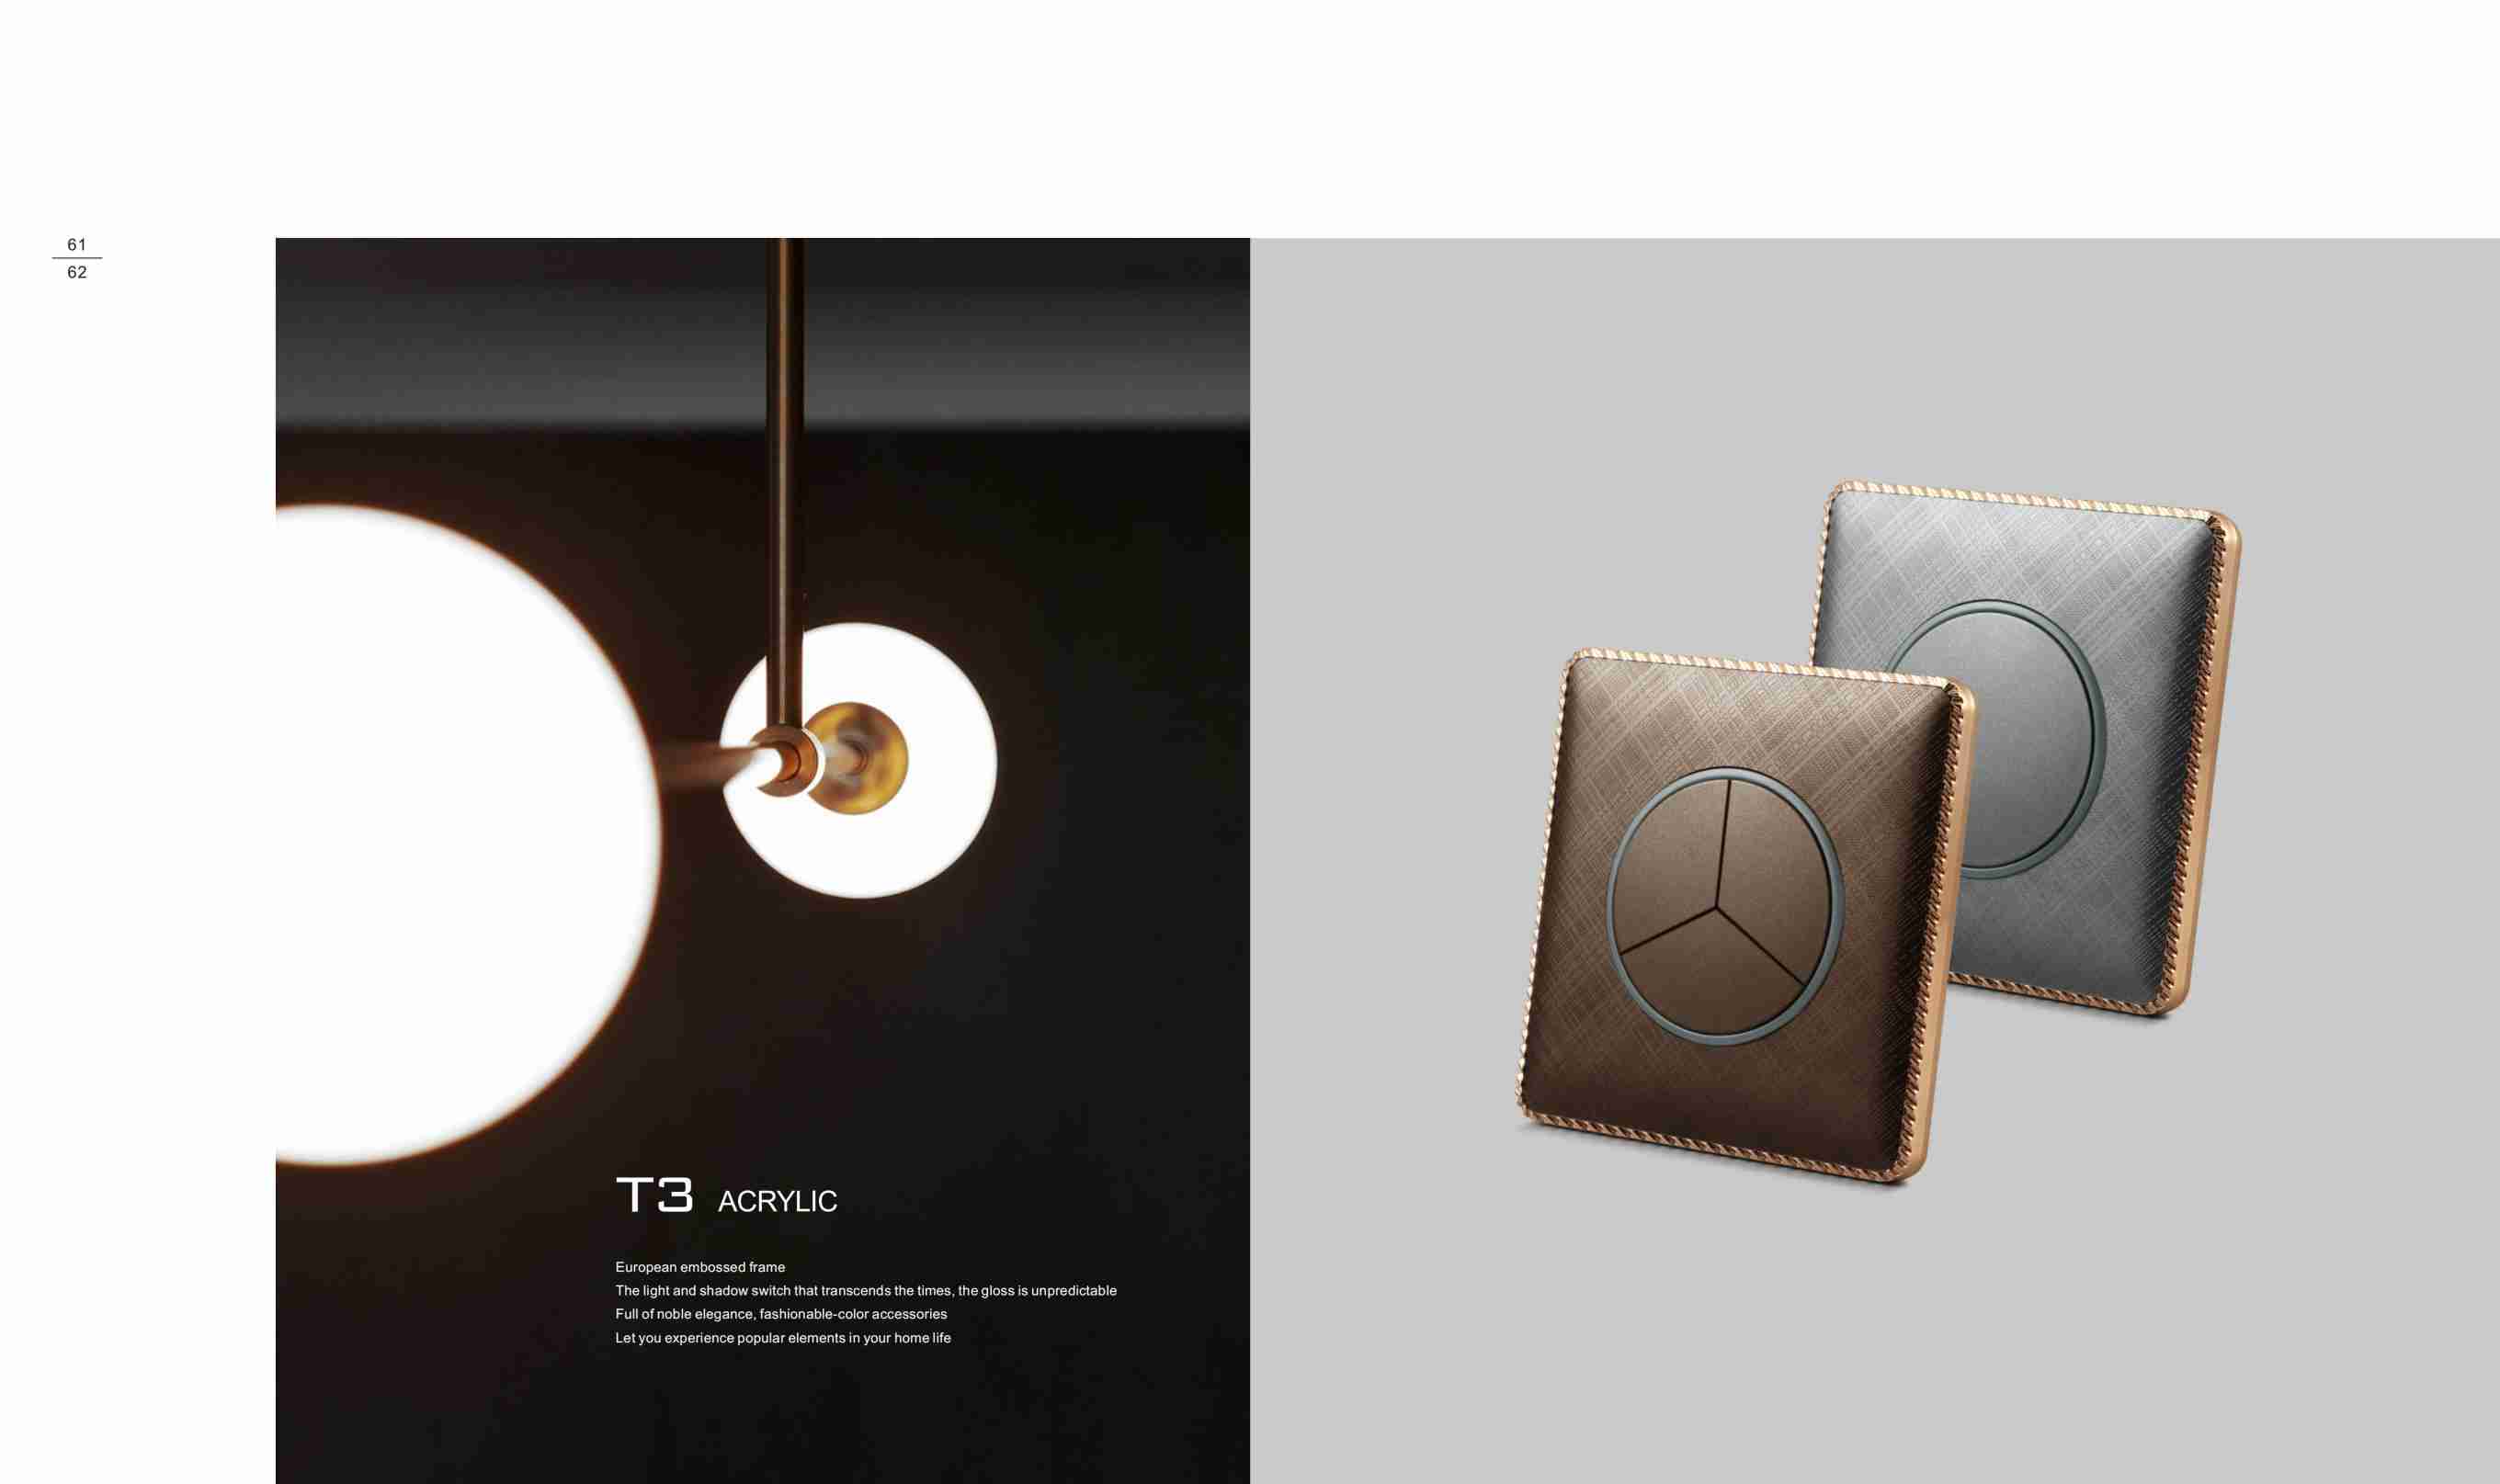 Post-modern T3 Light Switches With Postmodern Design.